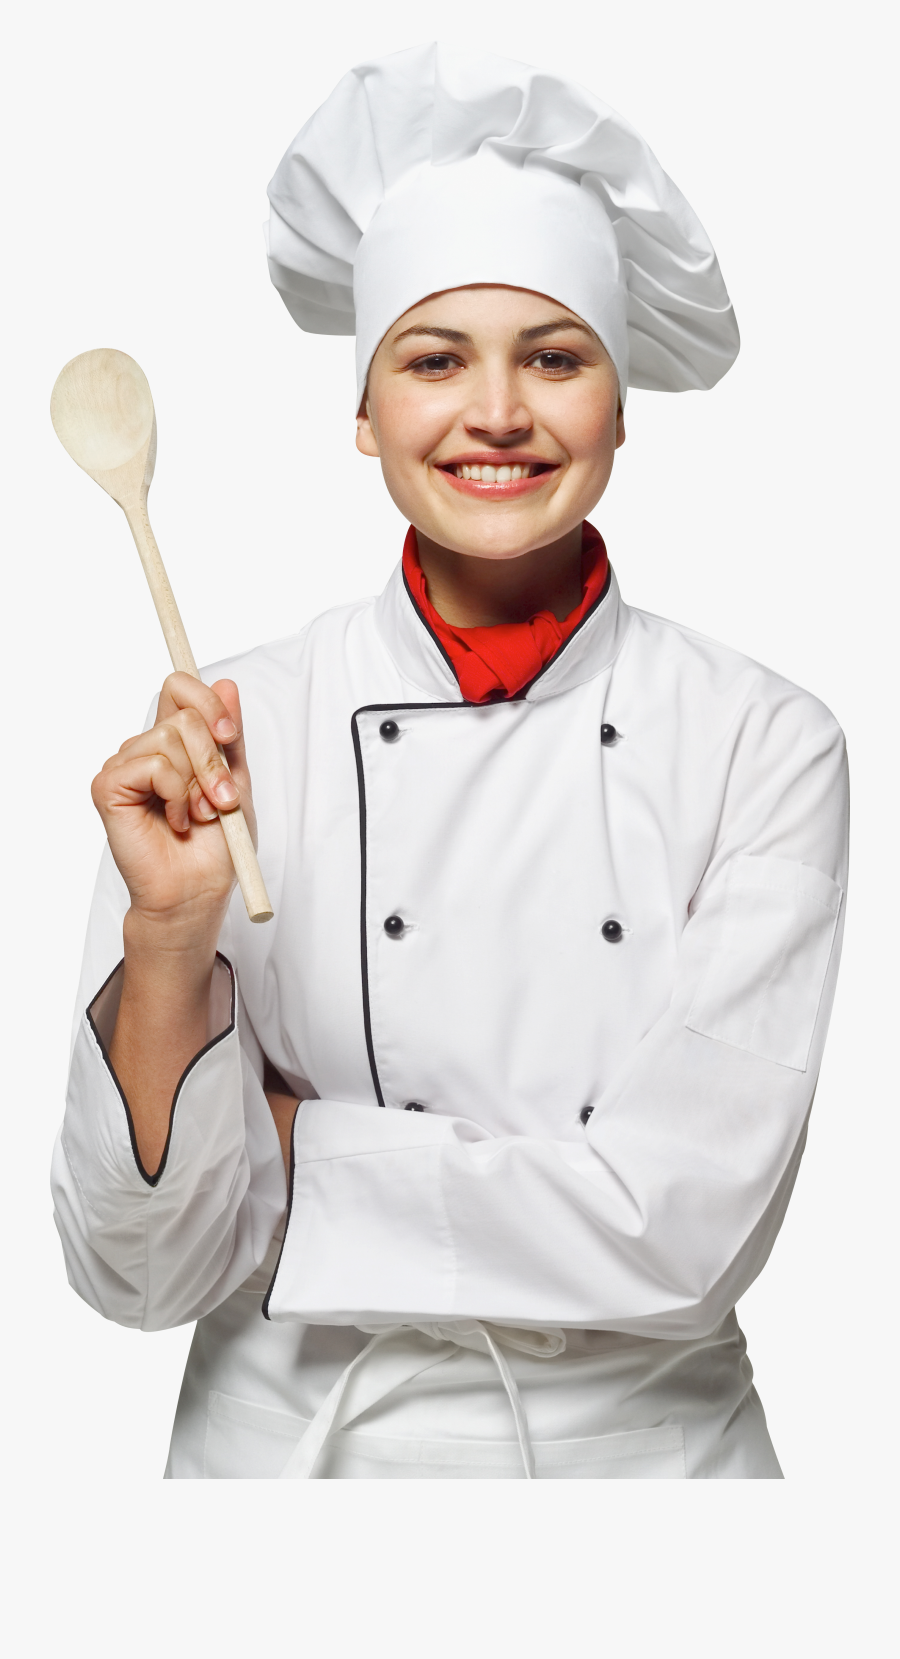 Chef Png Image - Chef Png, Transparent Clipart